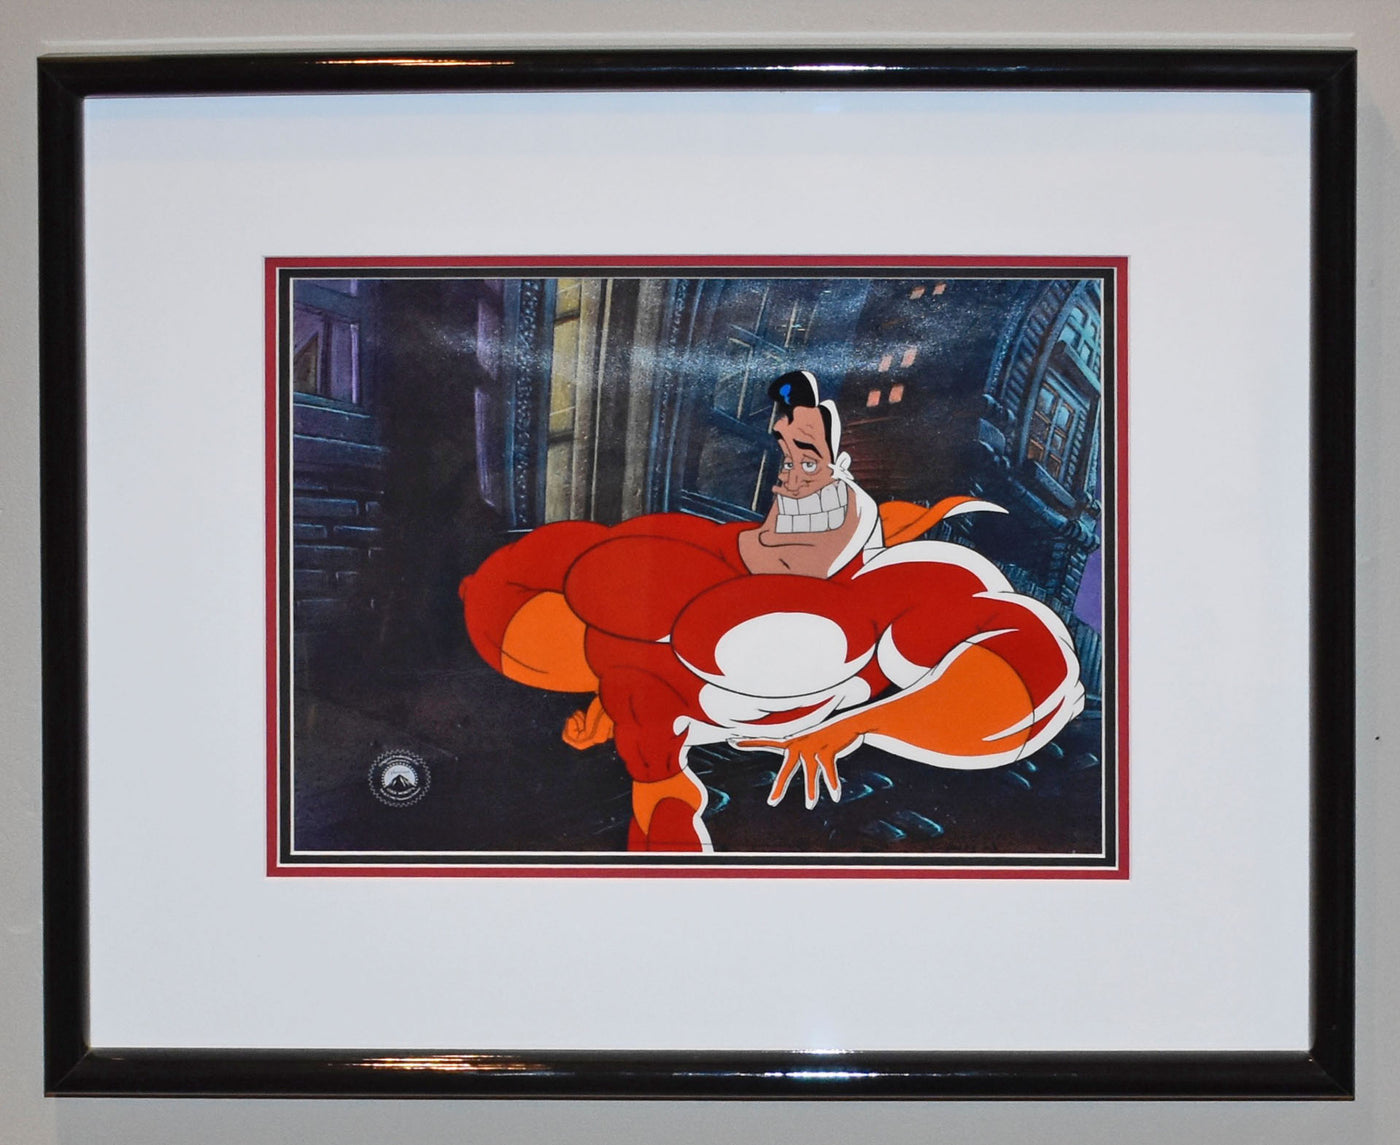 Paramount Studios Cool World Production Cel featuring Jack Deebs